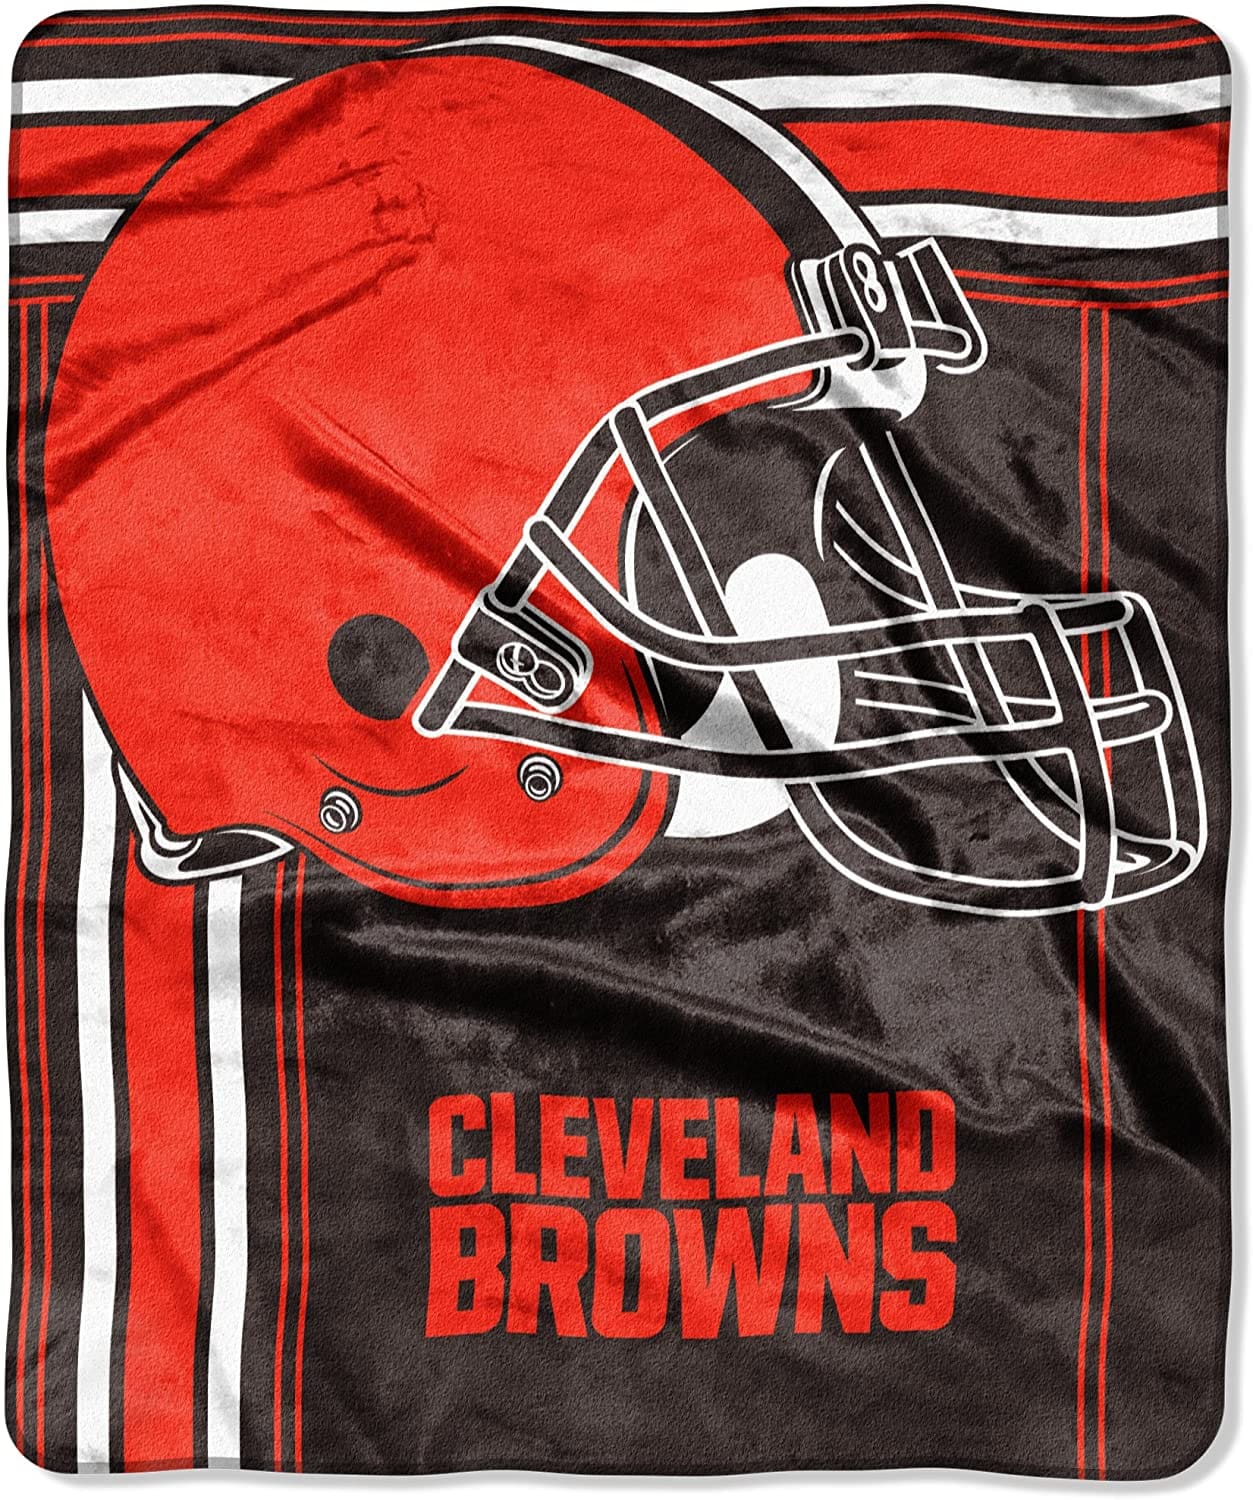 Officially Licensed Nfl Throw Cleveland Browns Fleece Blanket